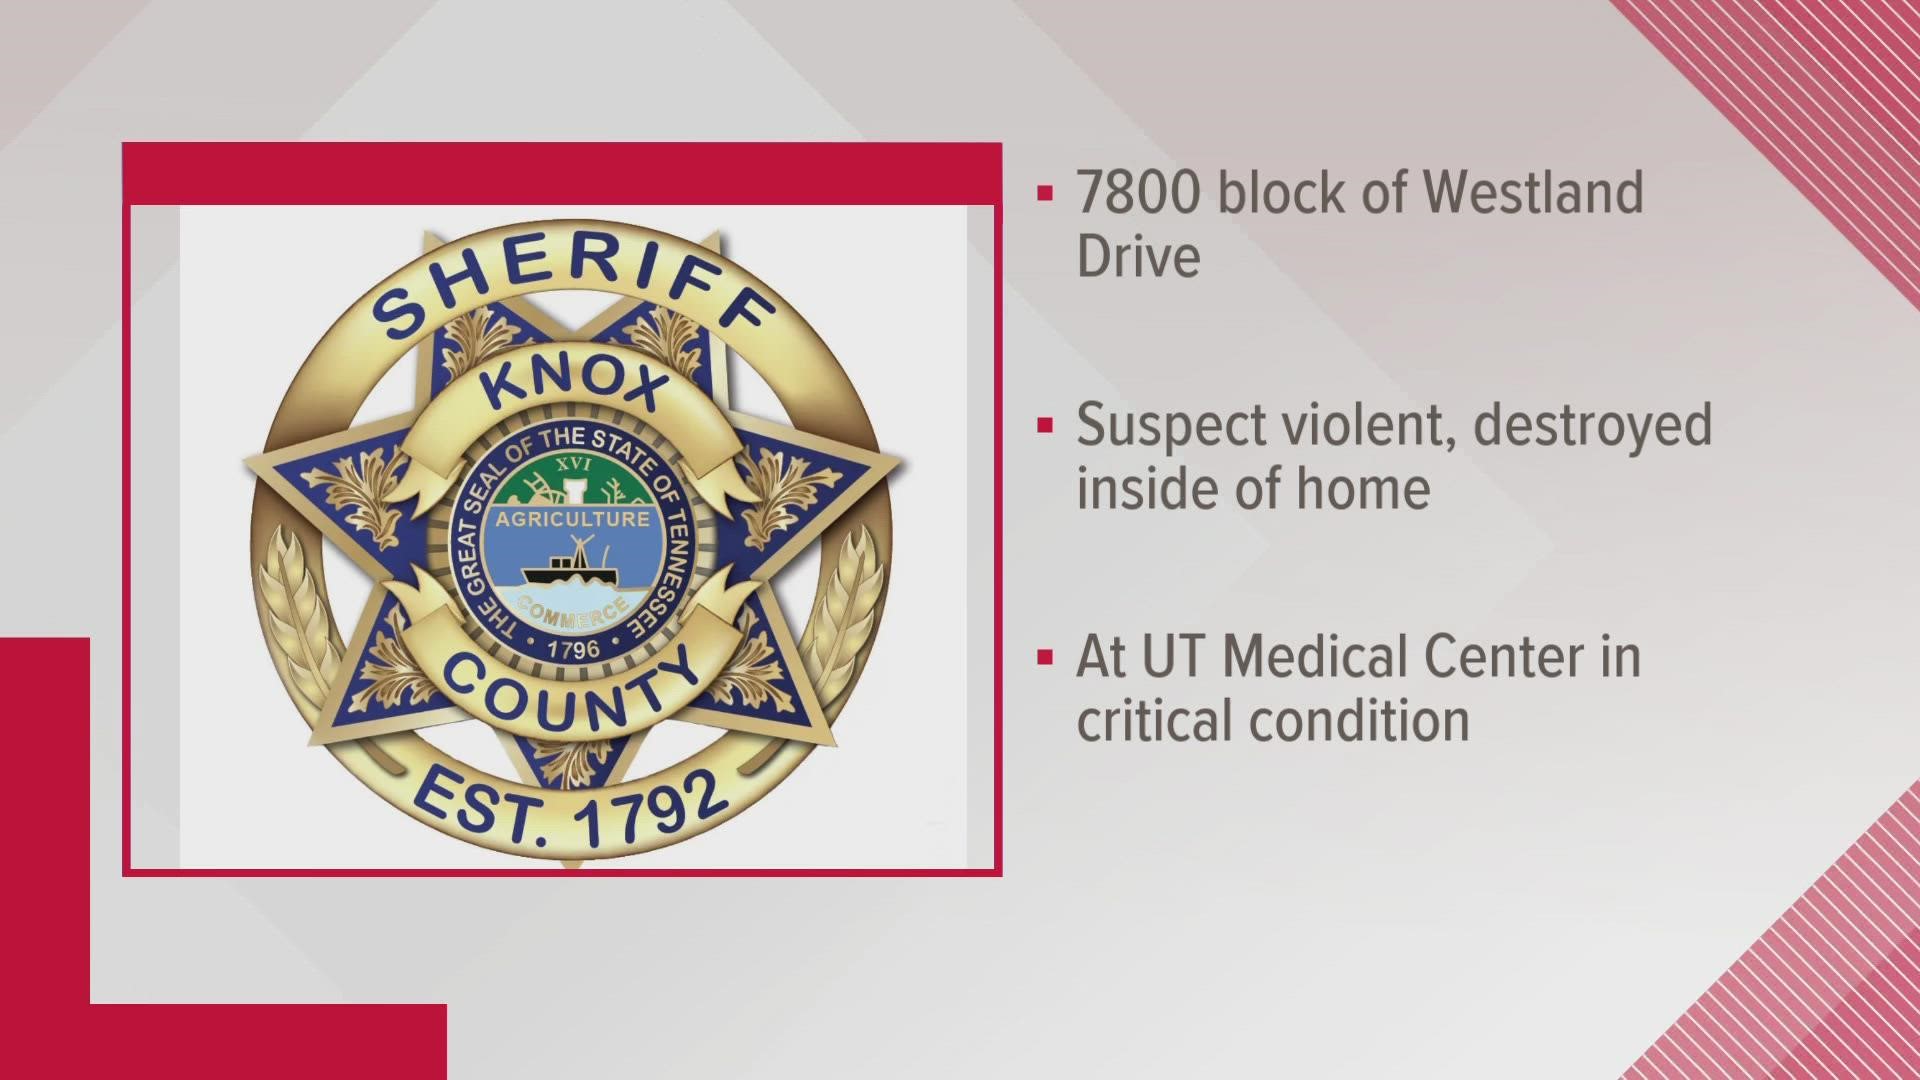 The Knox County Sheriff's Office said they received reports of a naked man who entered a home on Westland Drive at around 9 p.m. Tuesday.